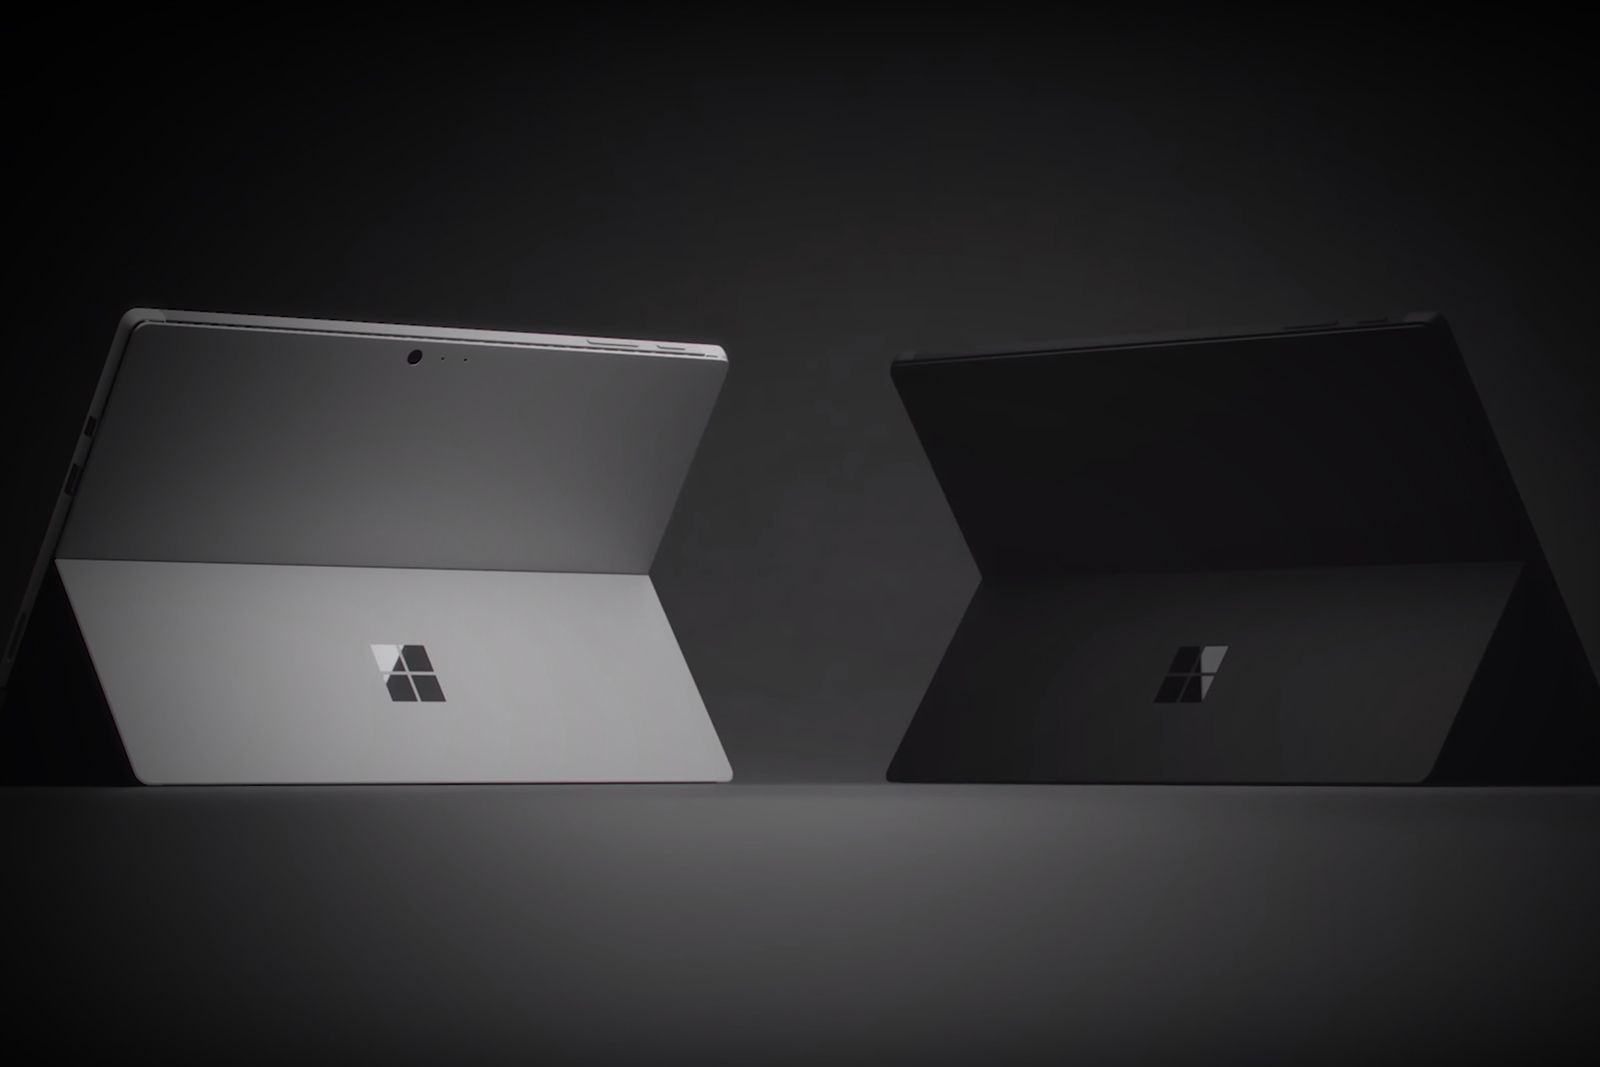 Microsoft Announces New Surface Pro 6 And Surface Laptop 2